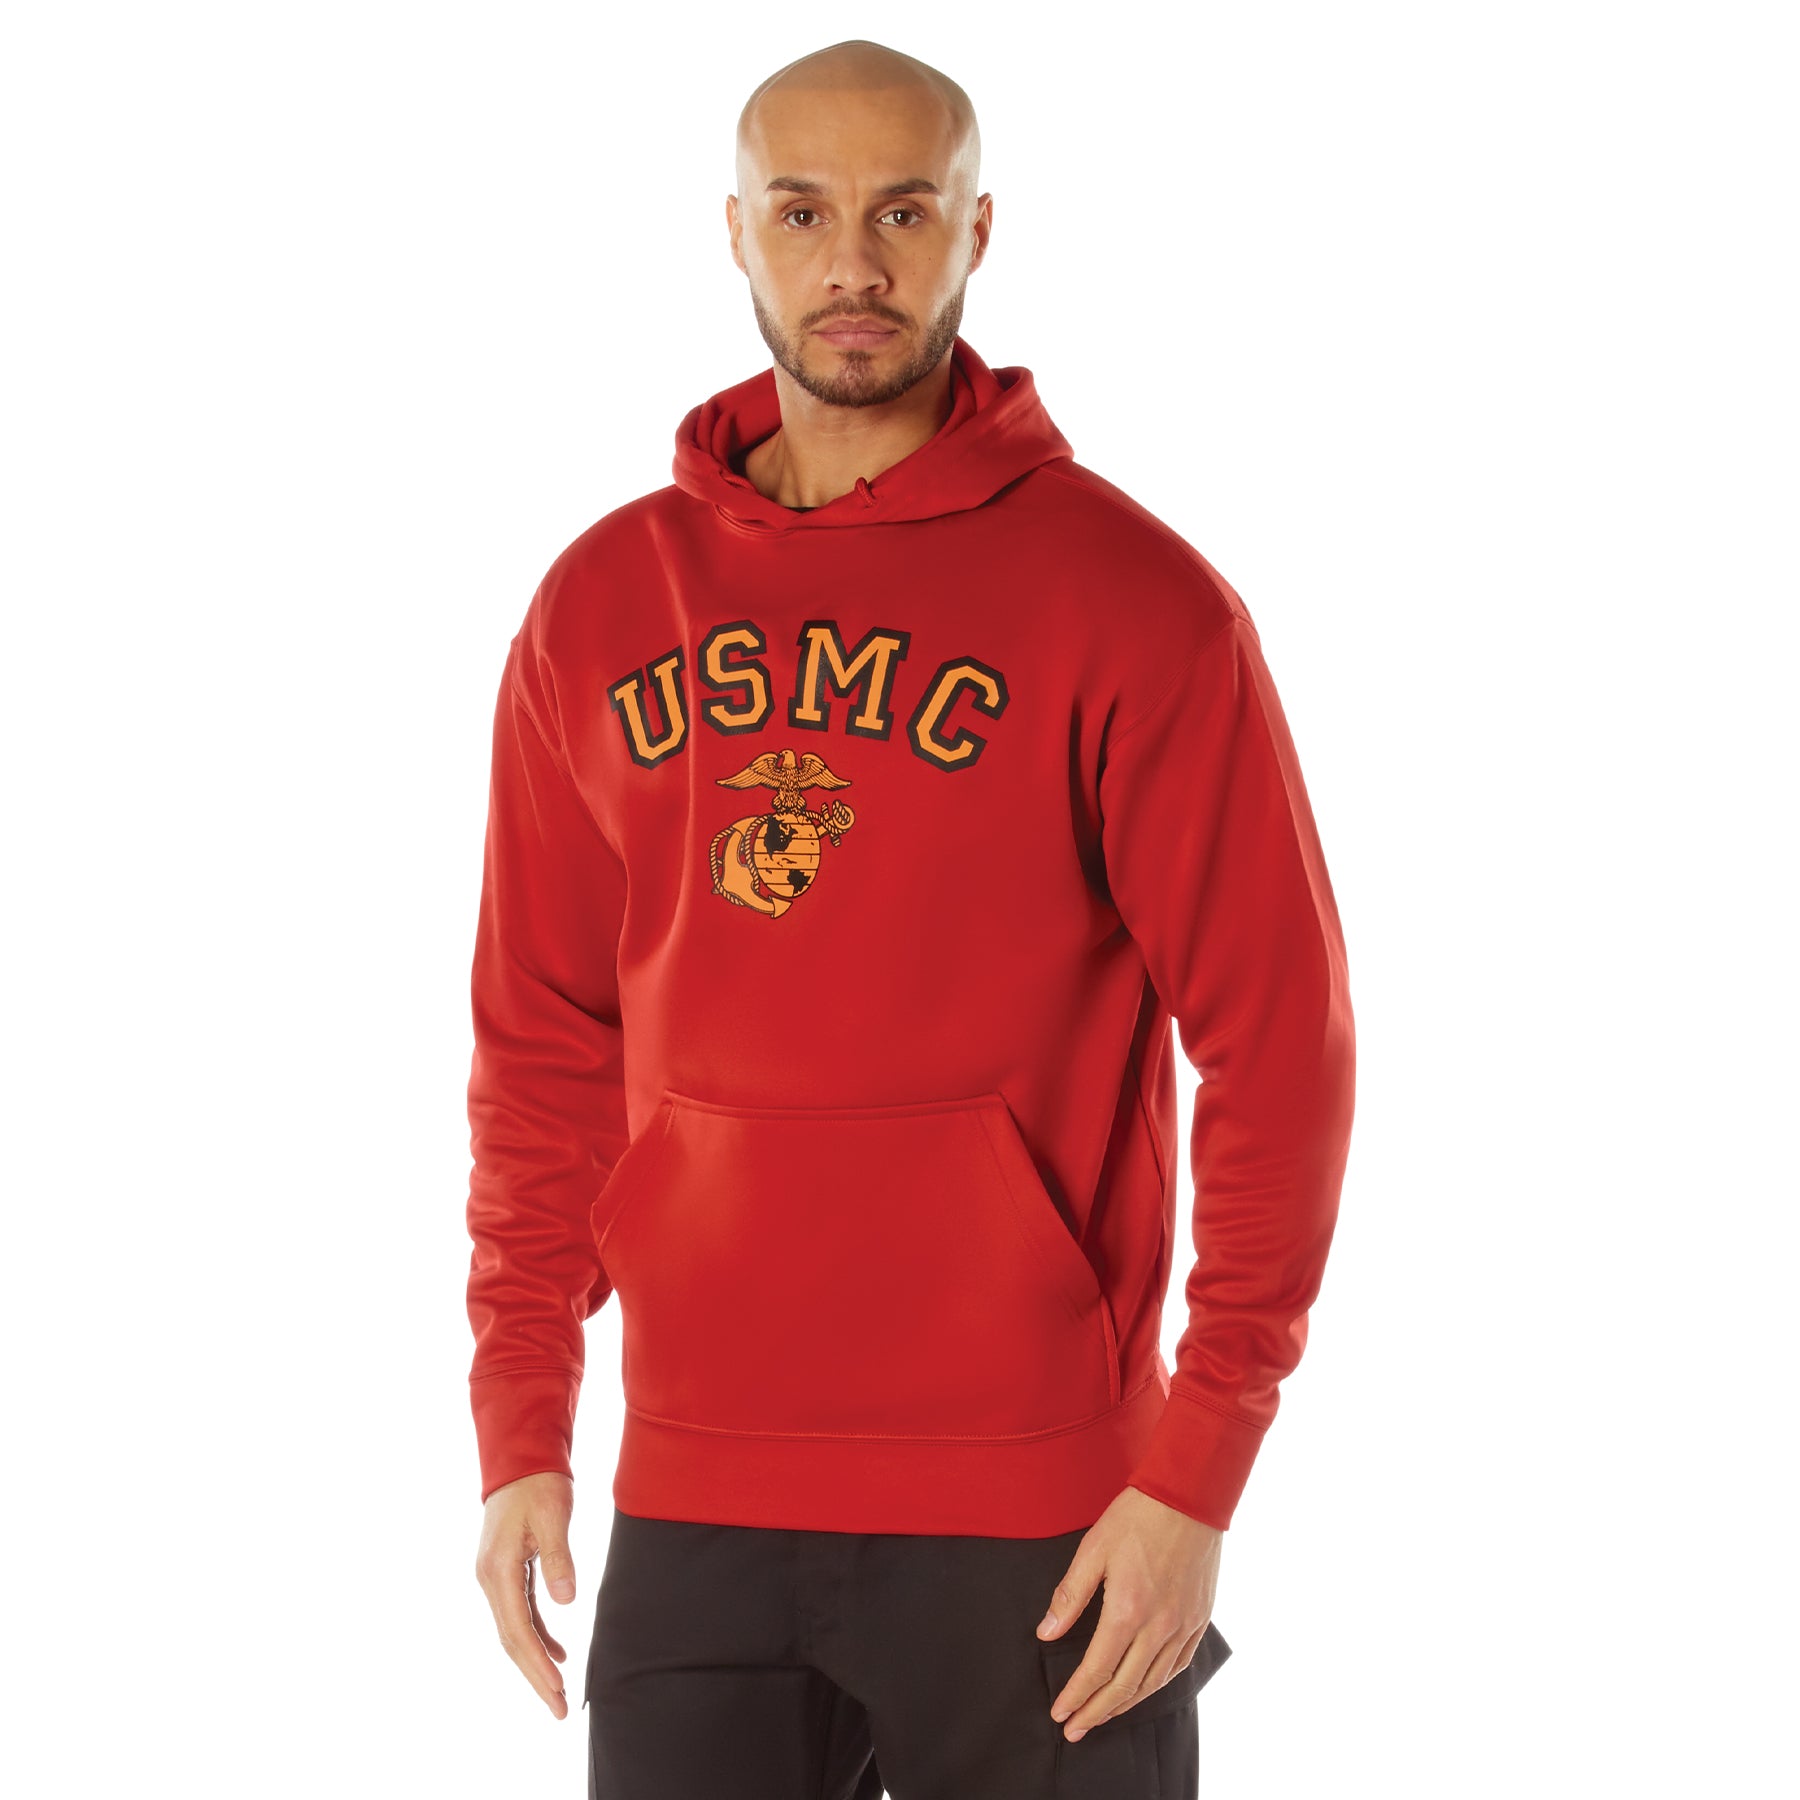 Poly Military USMC Eagle, Globe, and Anchor Hooded Sweatshirts Red